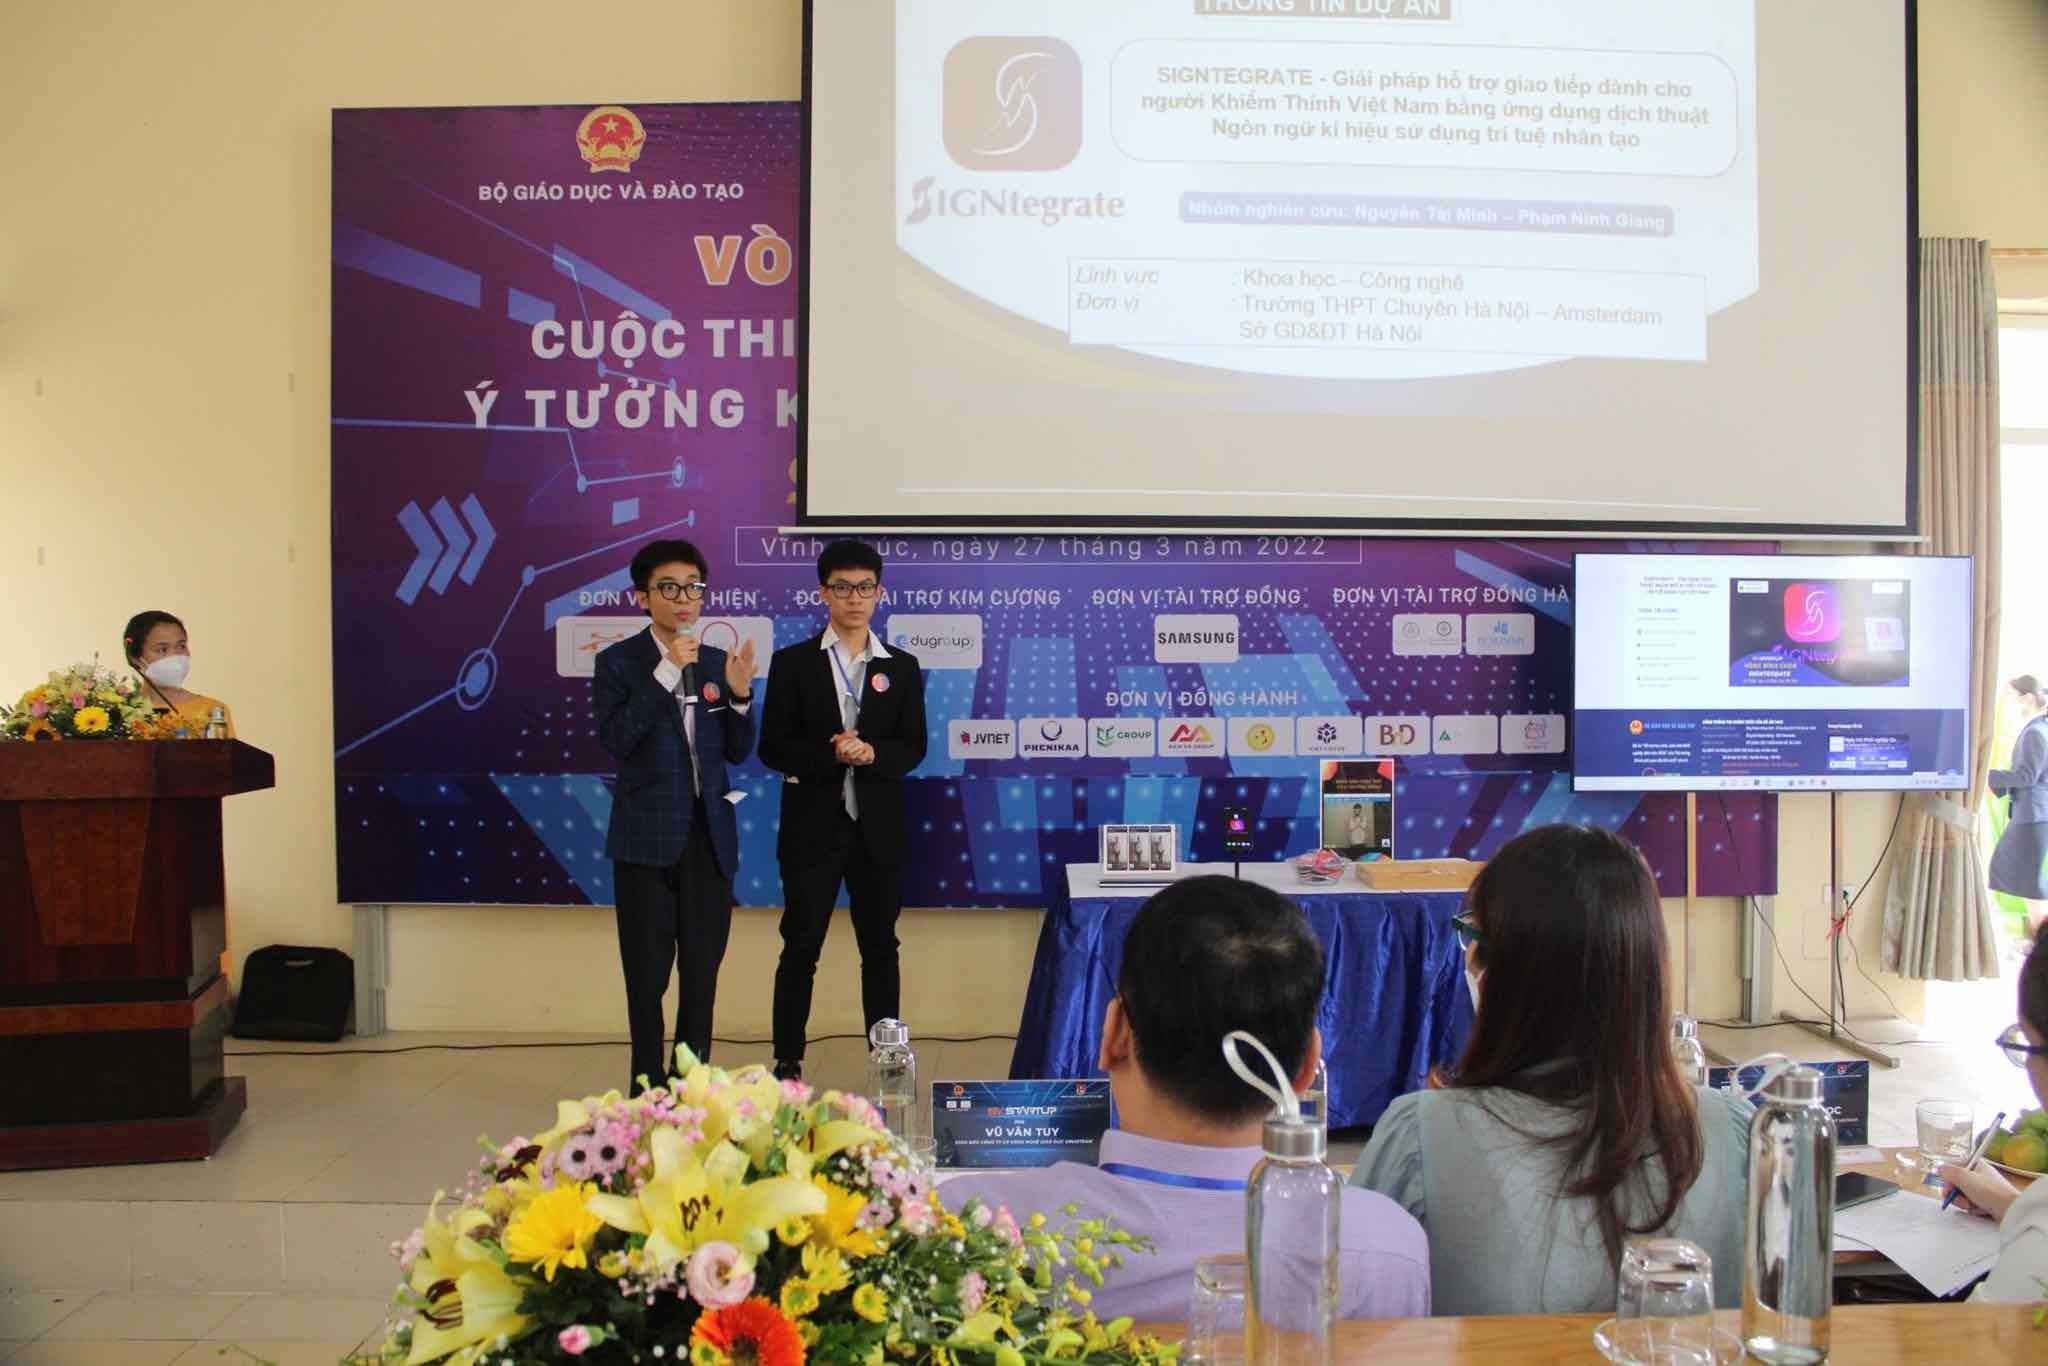 Two Hanoi 11th graders started their careers with a respectable project!